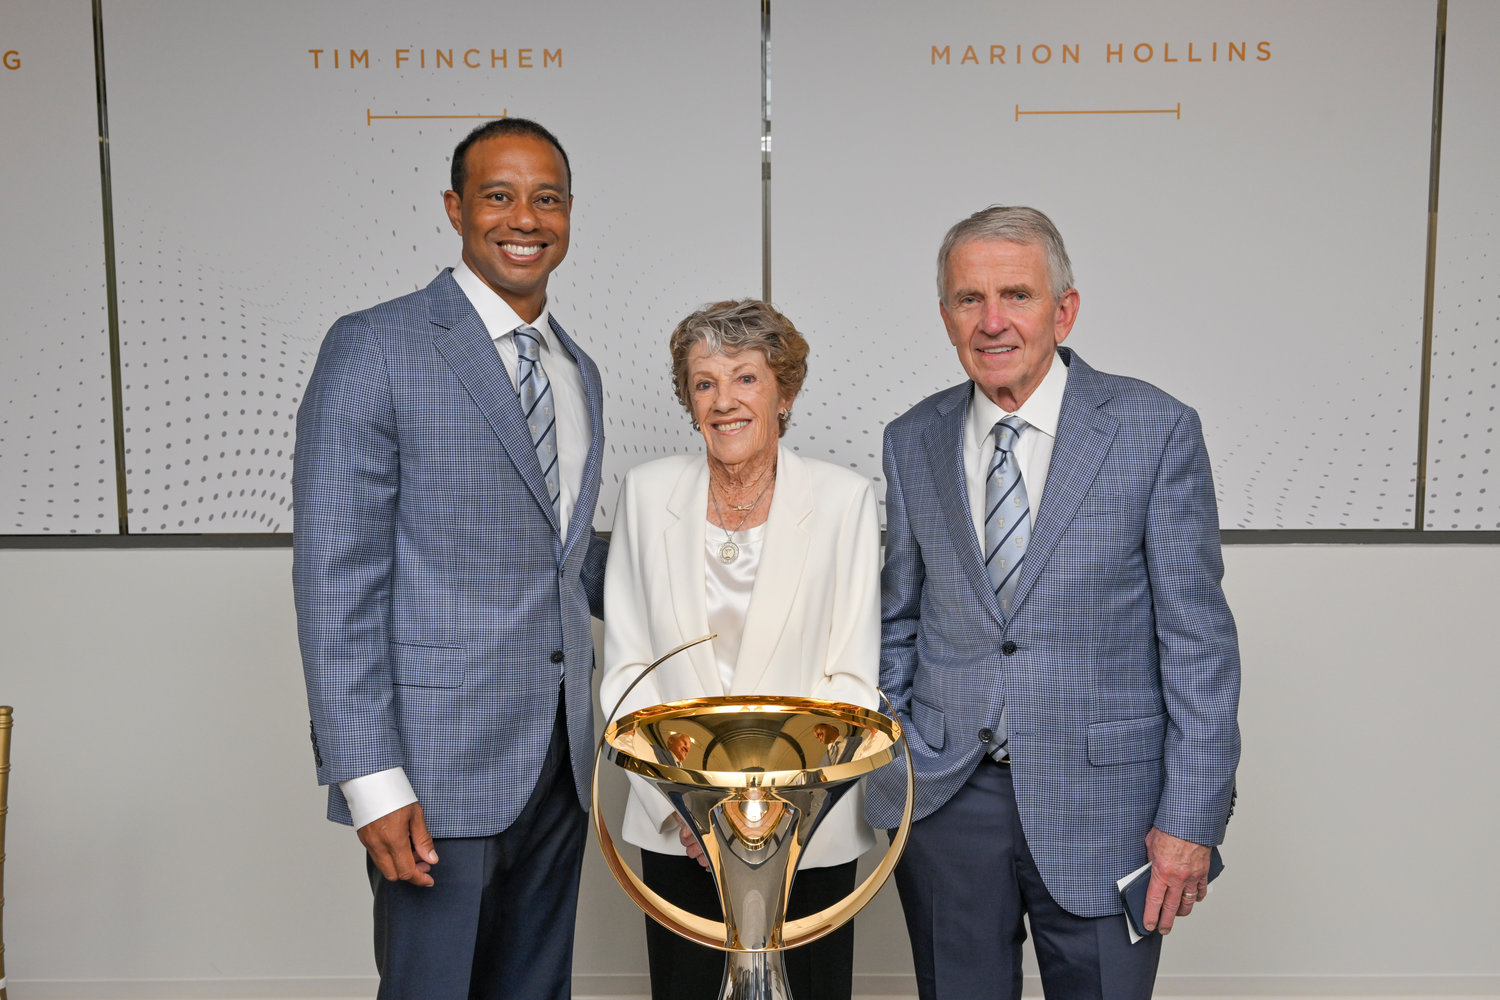 World Golf Hall of Fame 2022 inductees, from left, Tiger Woods, Susie Maxwell Berning and Tim Finchem.